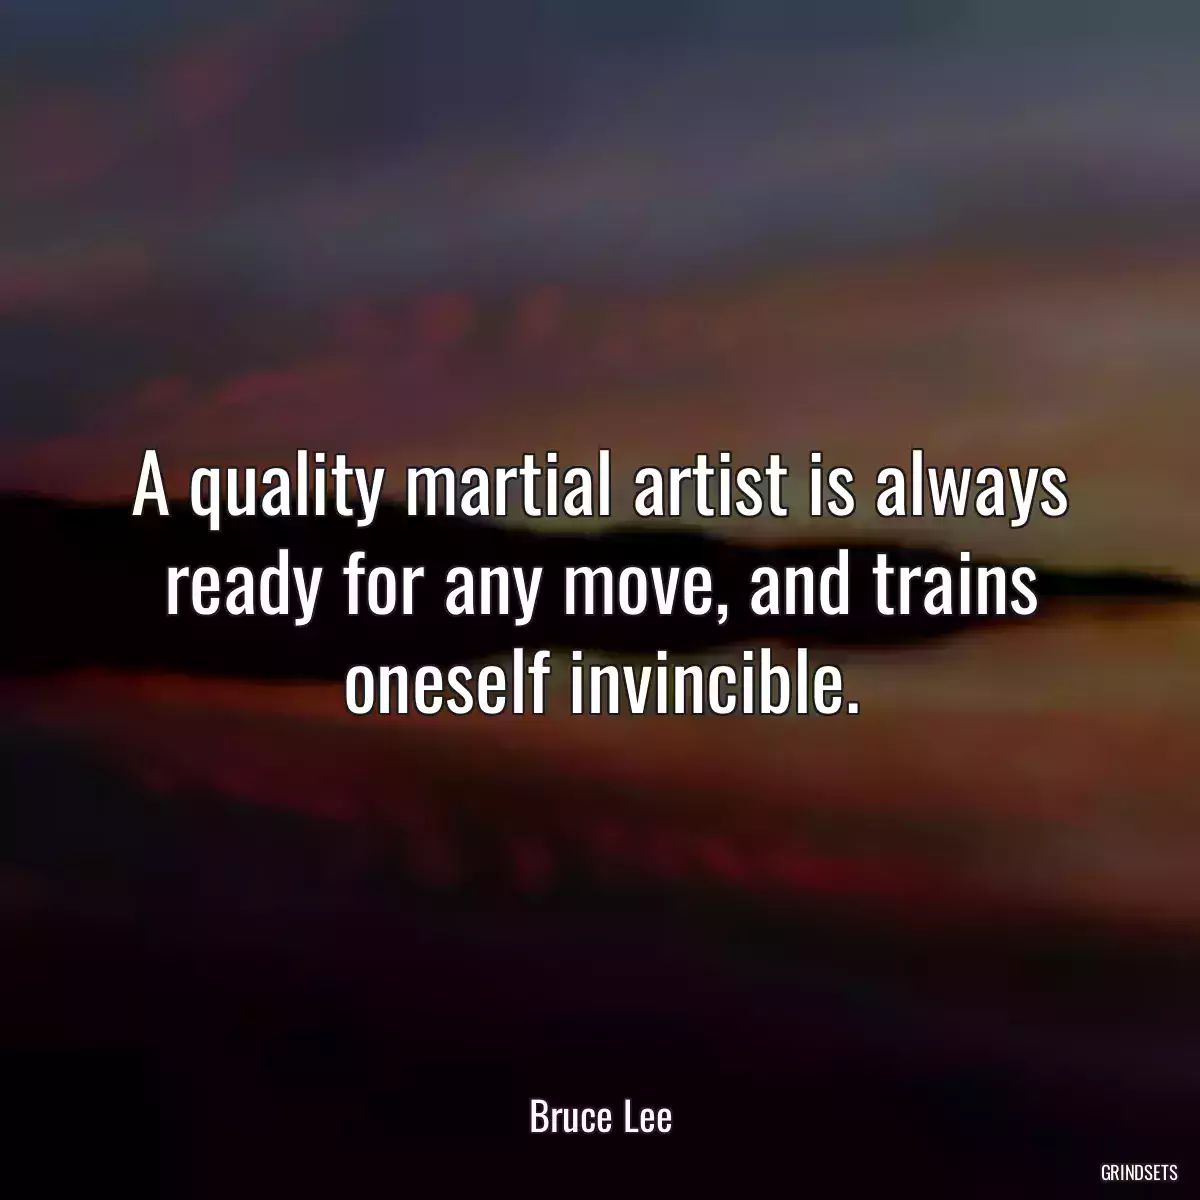 A quality martial artist is always ready for any move, and trains oneself invincible.